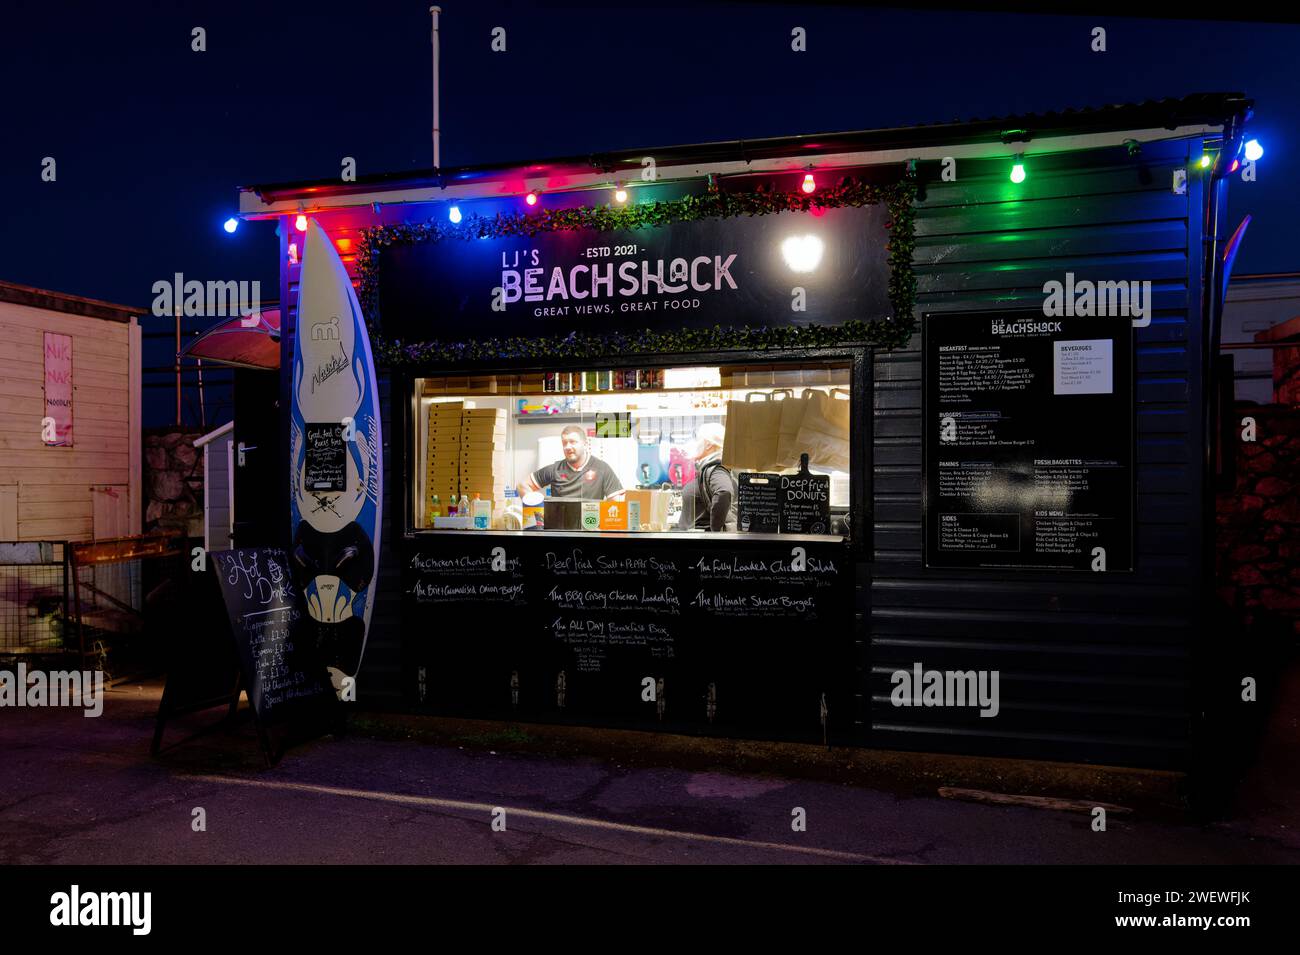 The Beach Shack fast food kiosk at Teignmouth, UK at night. A male and female are serving in the hatchway with menus on the outside of the kiosk. Stock Photo